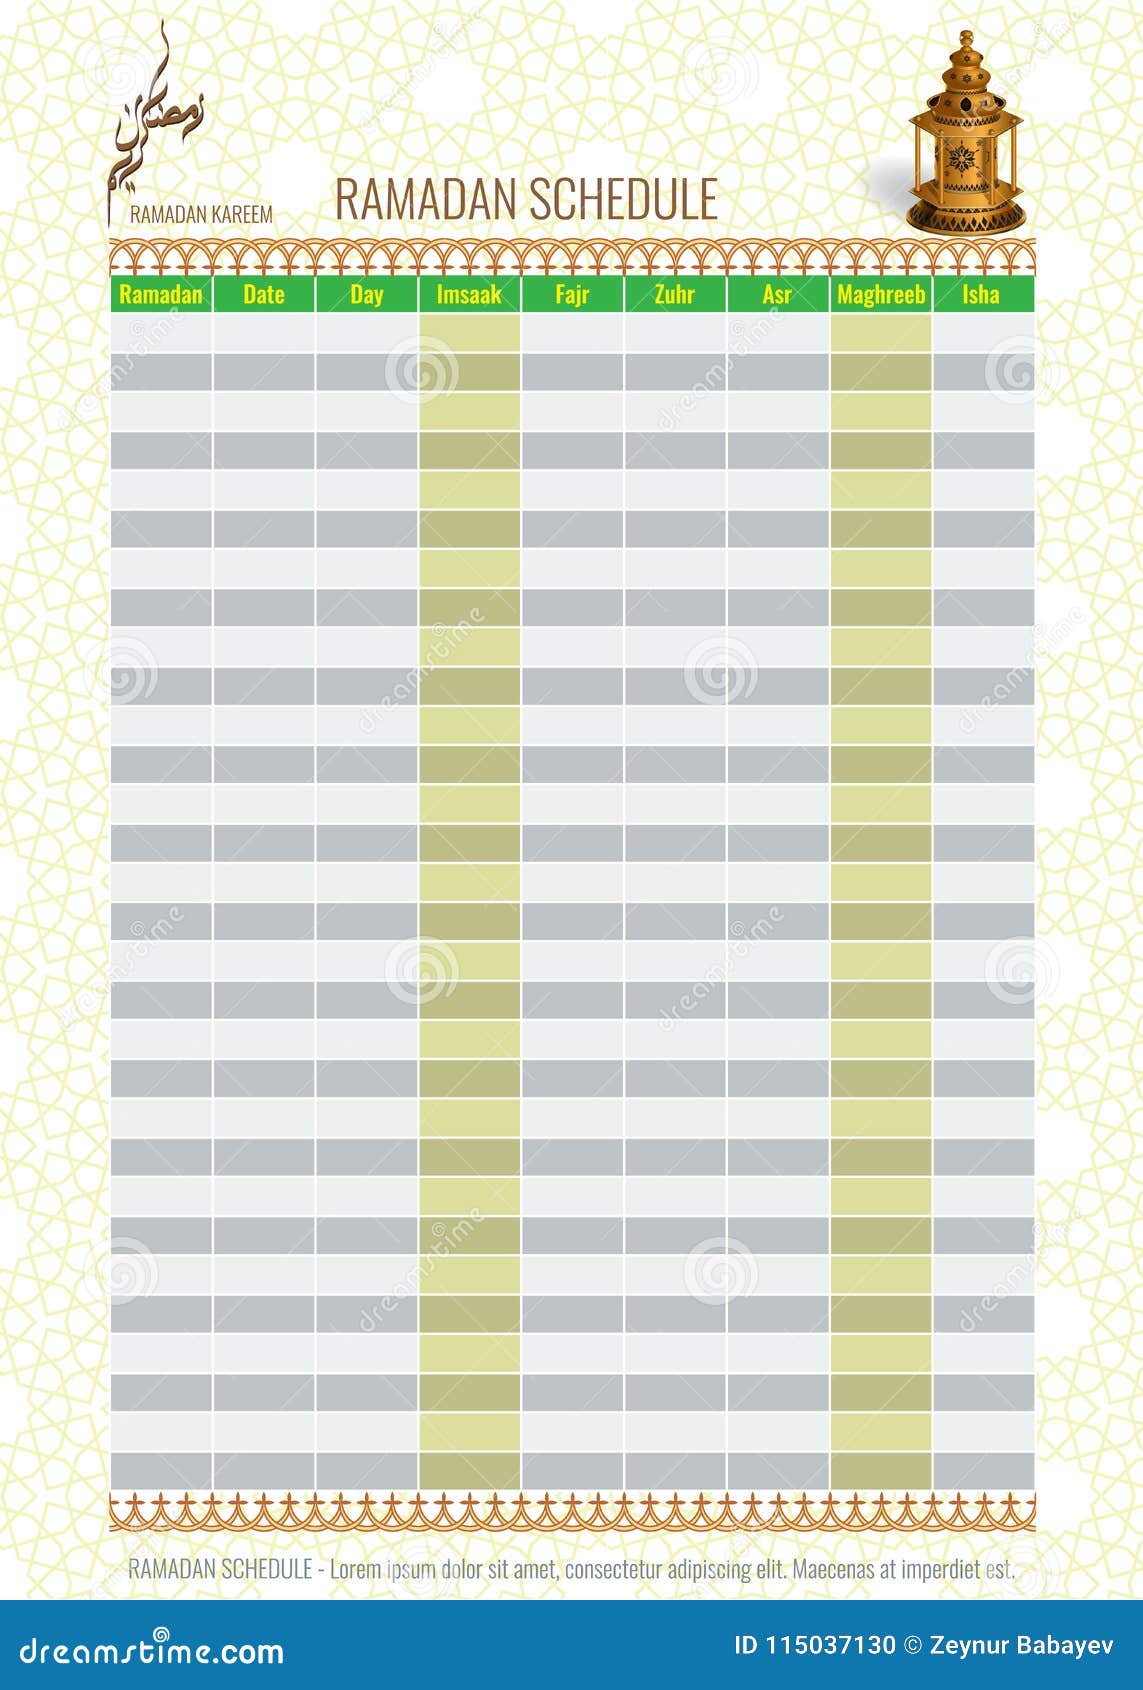 Ramadan Calendar Schedule Fasting and Prayer Time Guide Stock Vector